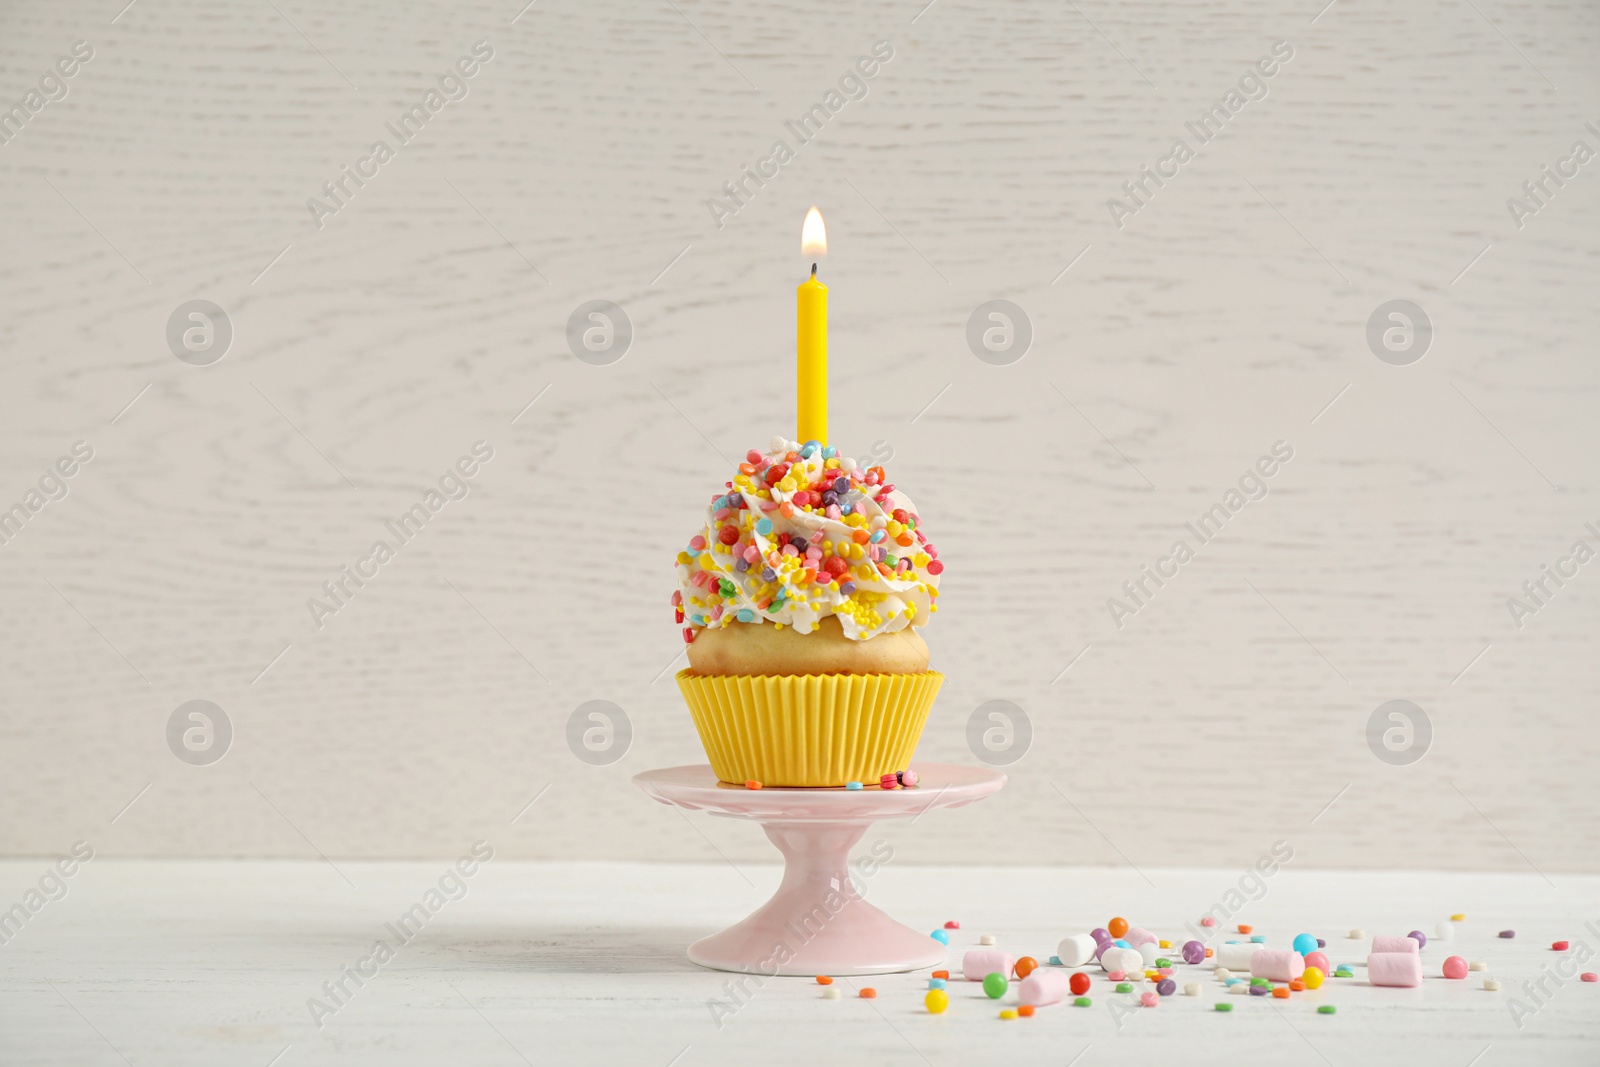 Photo of Birthday cupcake with candle on white table against wooden background